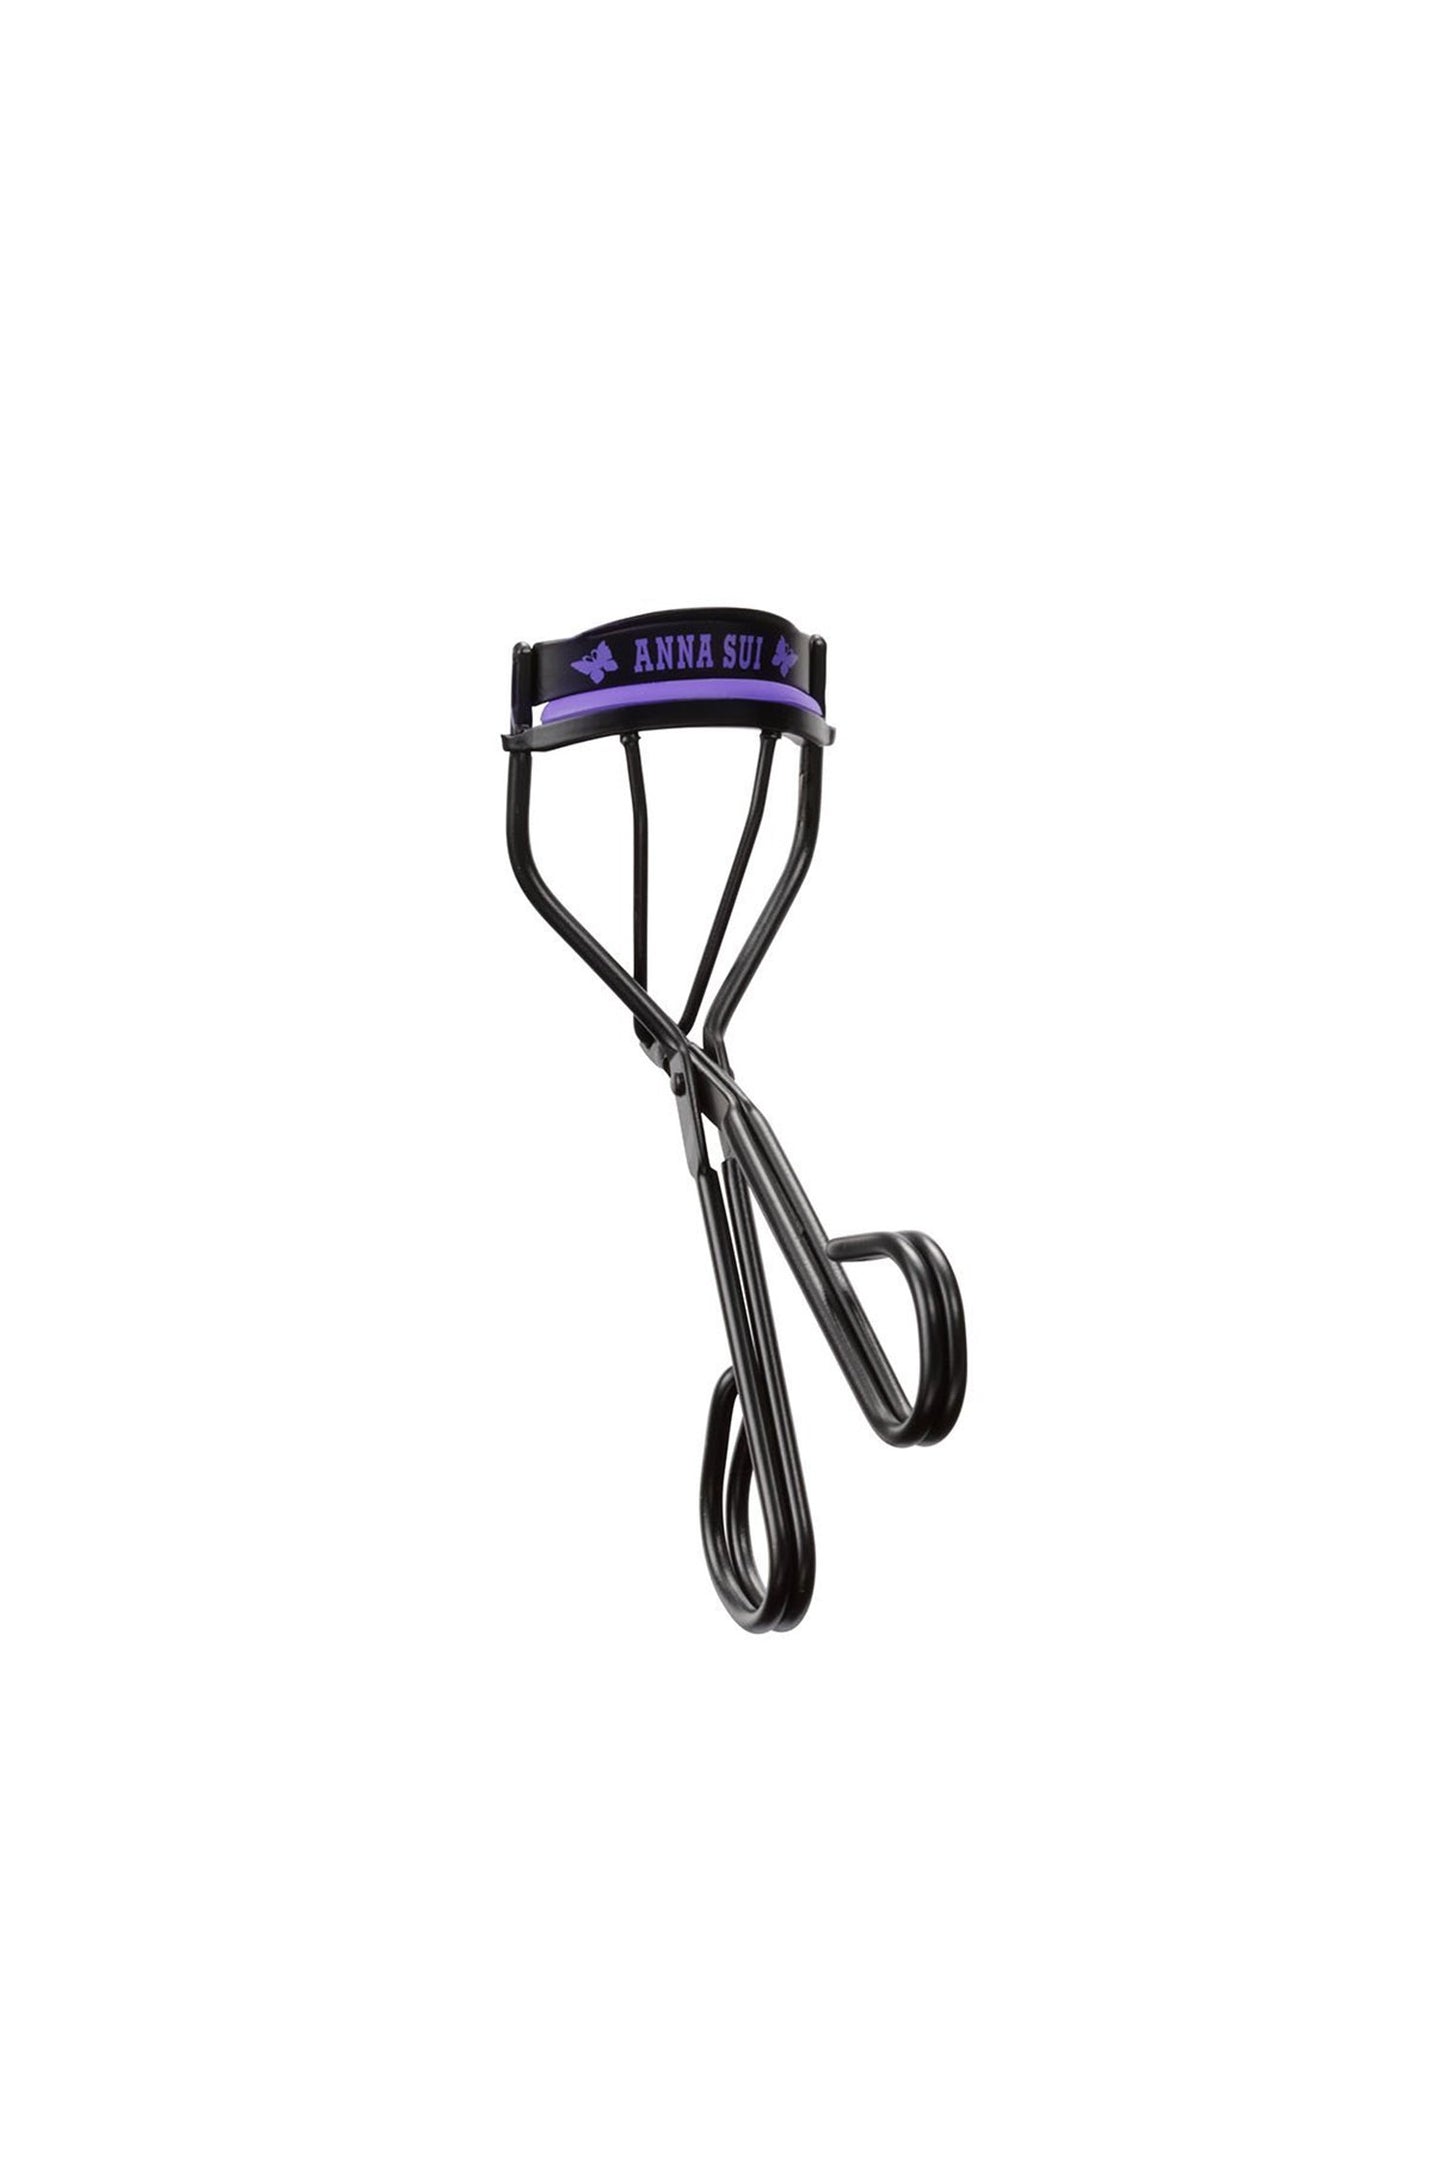 Silicone pad Eyelash Curler provides a protective, stay-put edge for improved safety & optimal curl